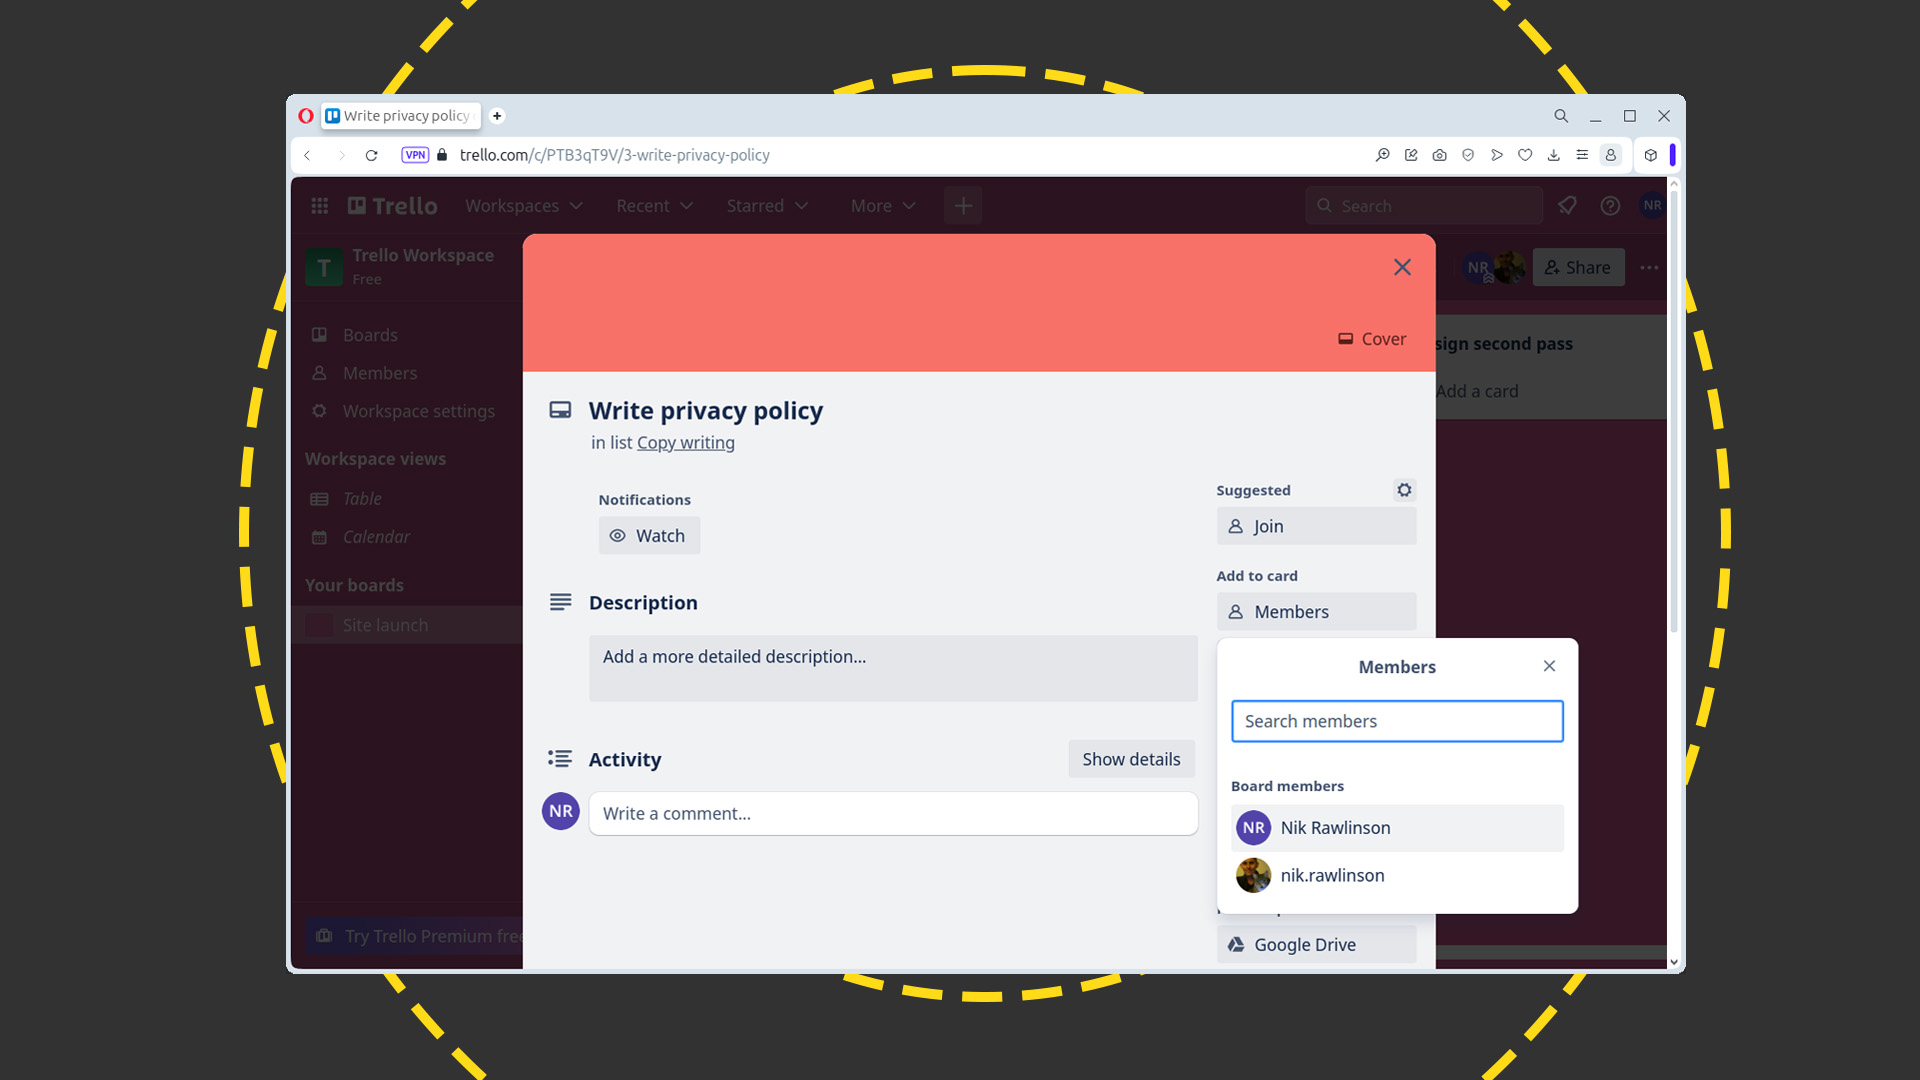 From April, free Trello accounts will be capped at ten members